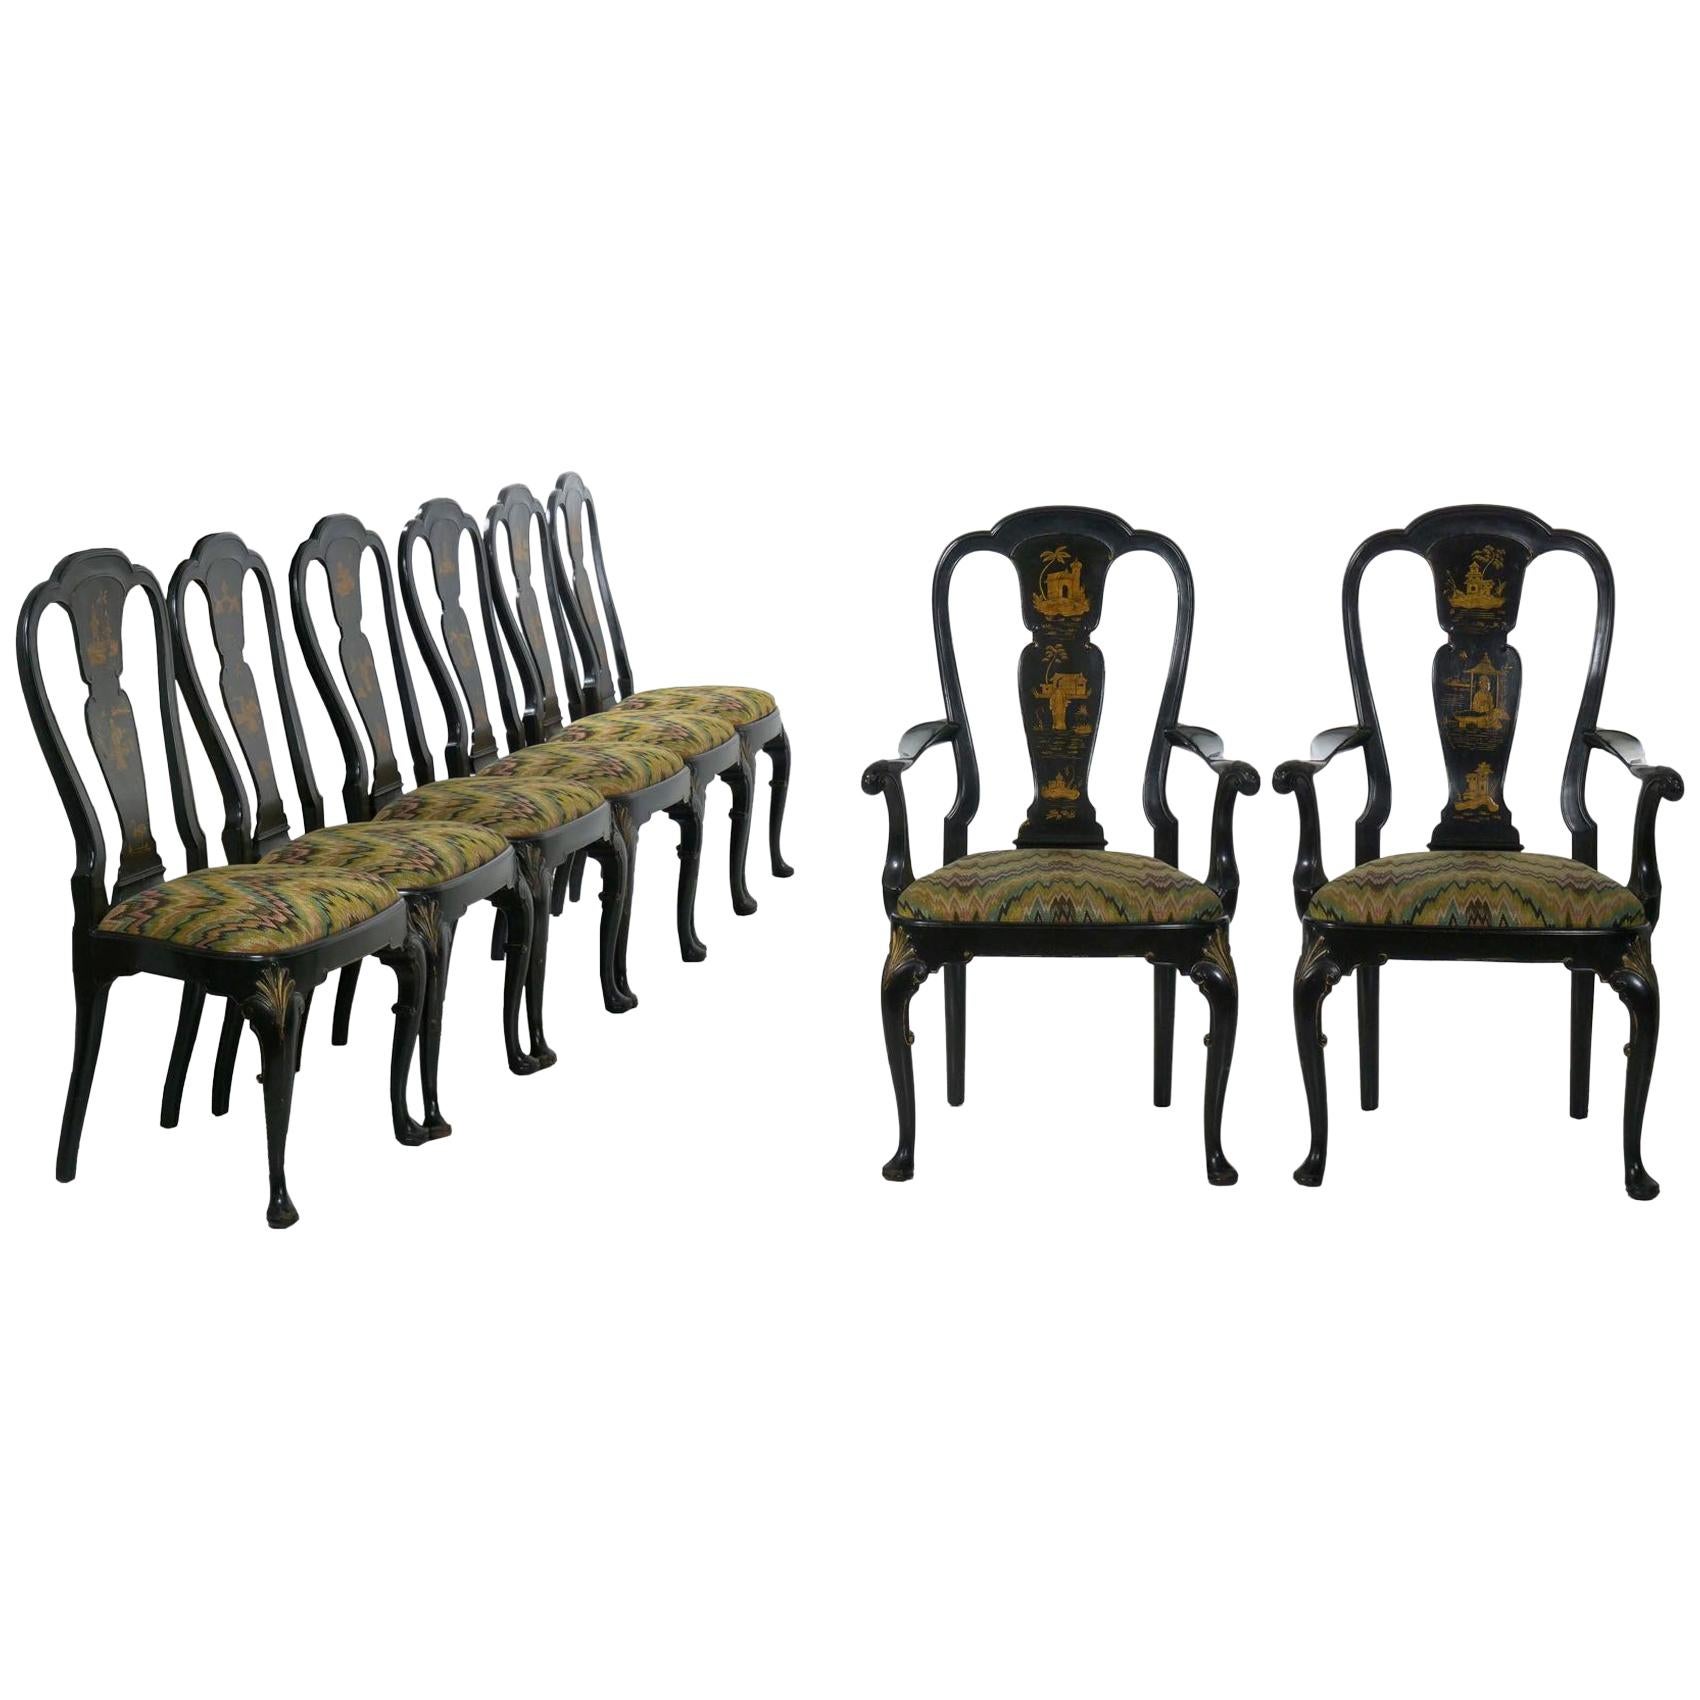 Set of 8 Queen Anne Style Black Lacquer Chinoiserie Dining Chairs